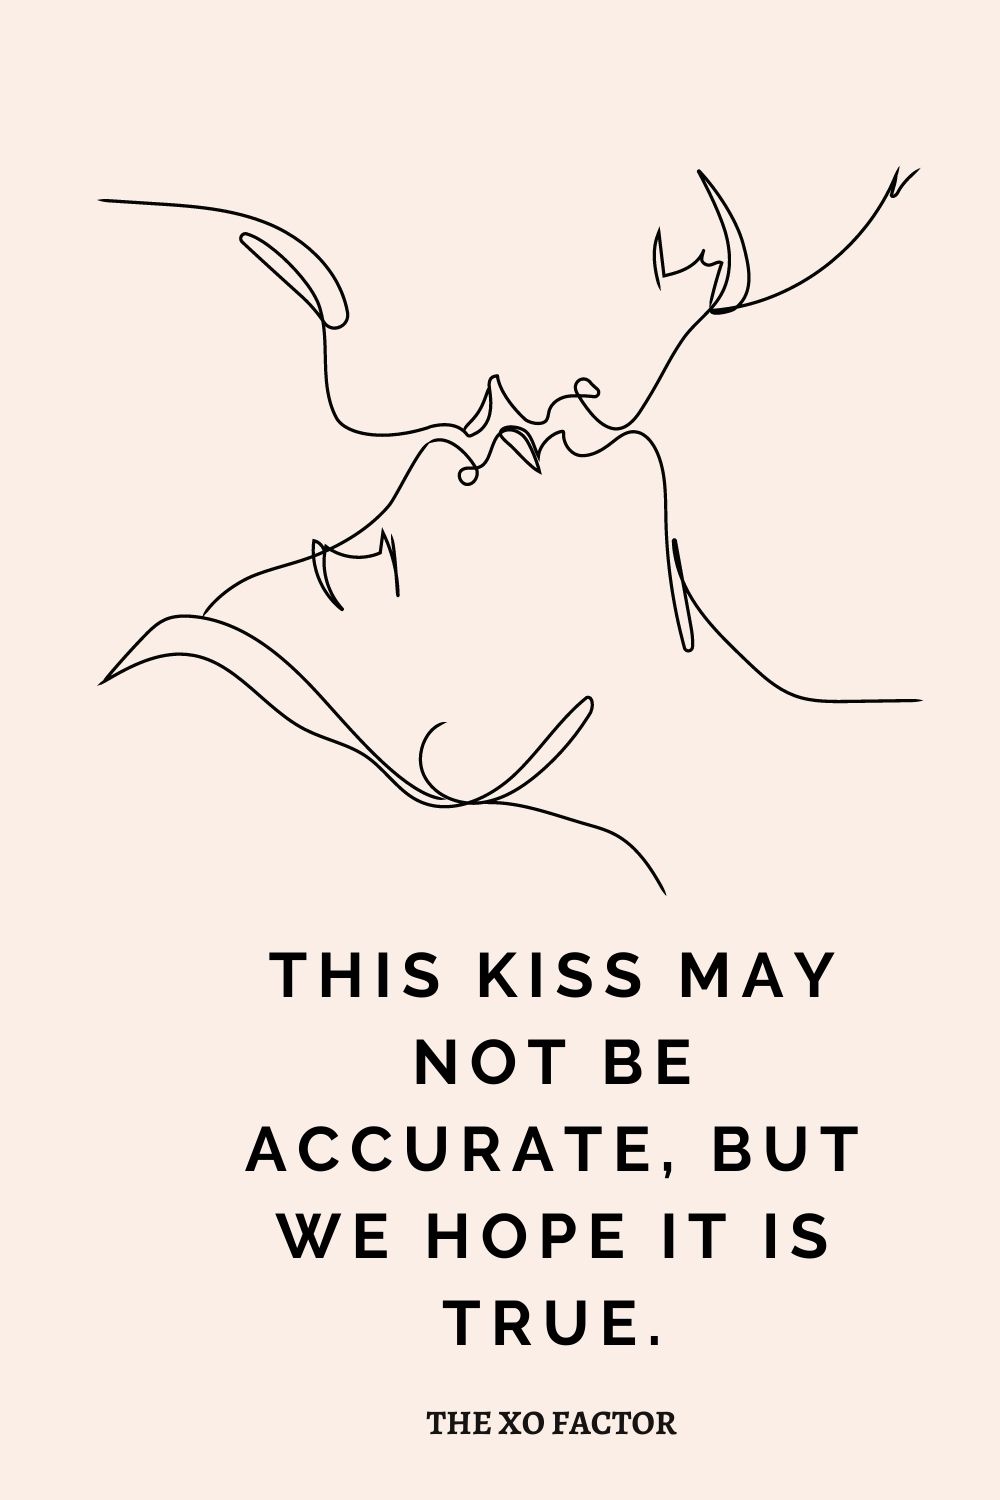 This kiss may not be accurate, but we hope it is true.